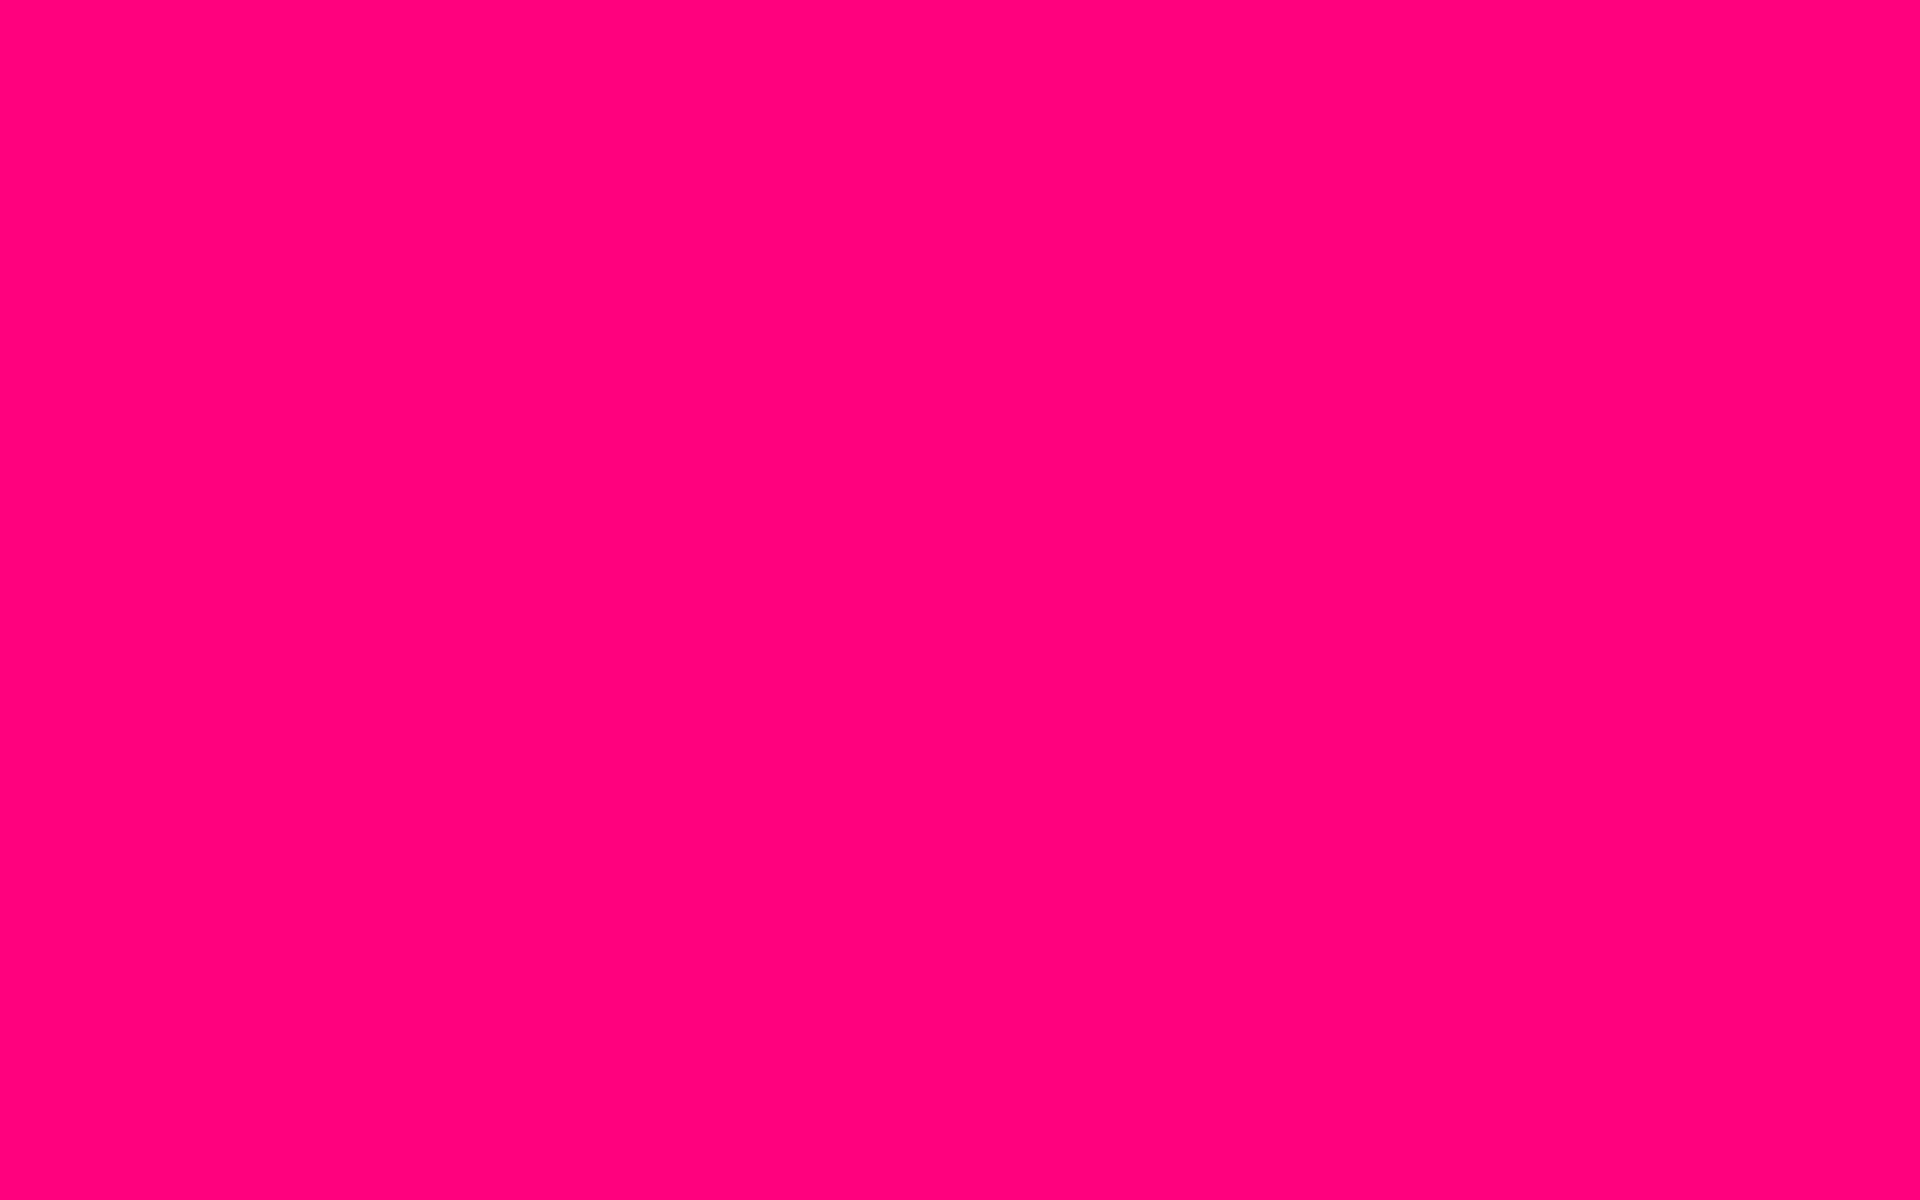 1920x1200-bright-pink-solid-color-background.jpg